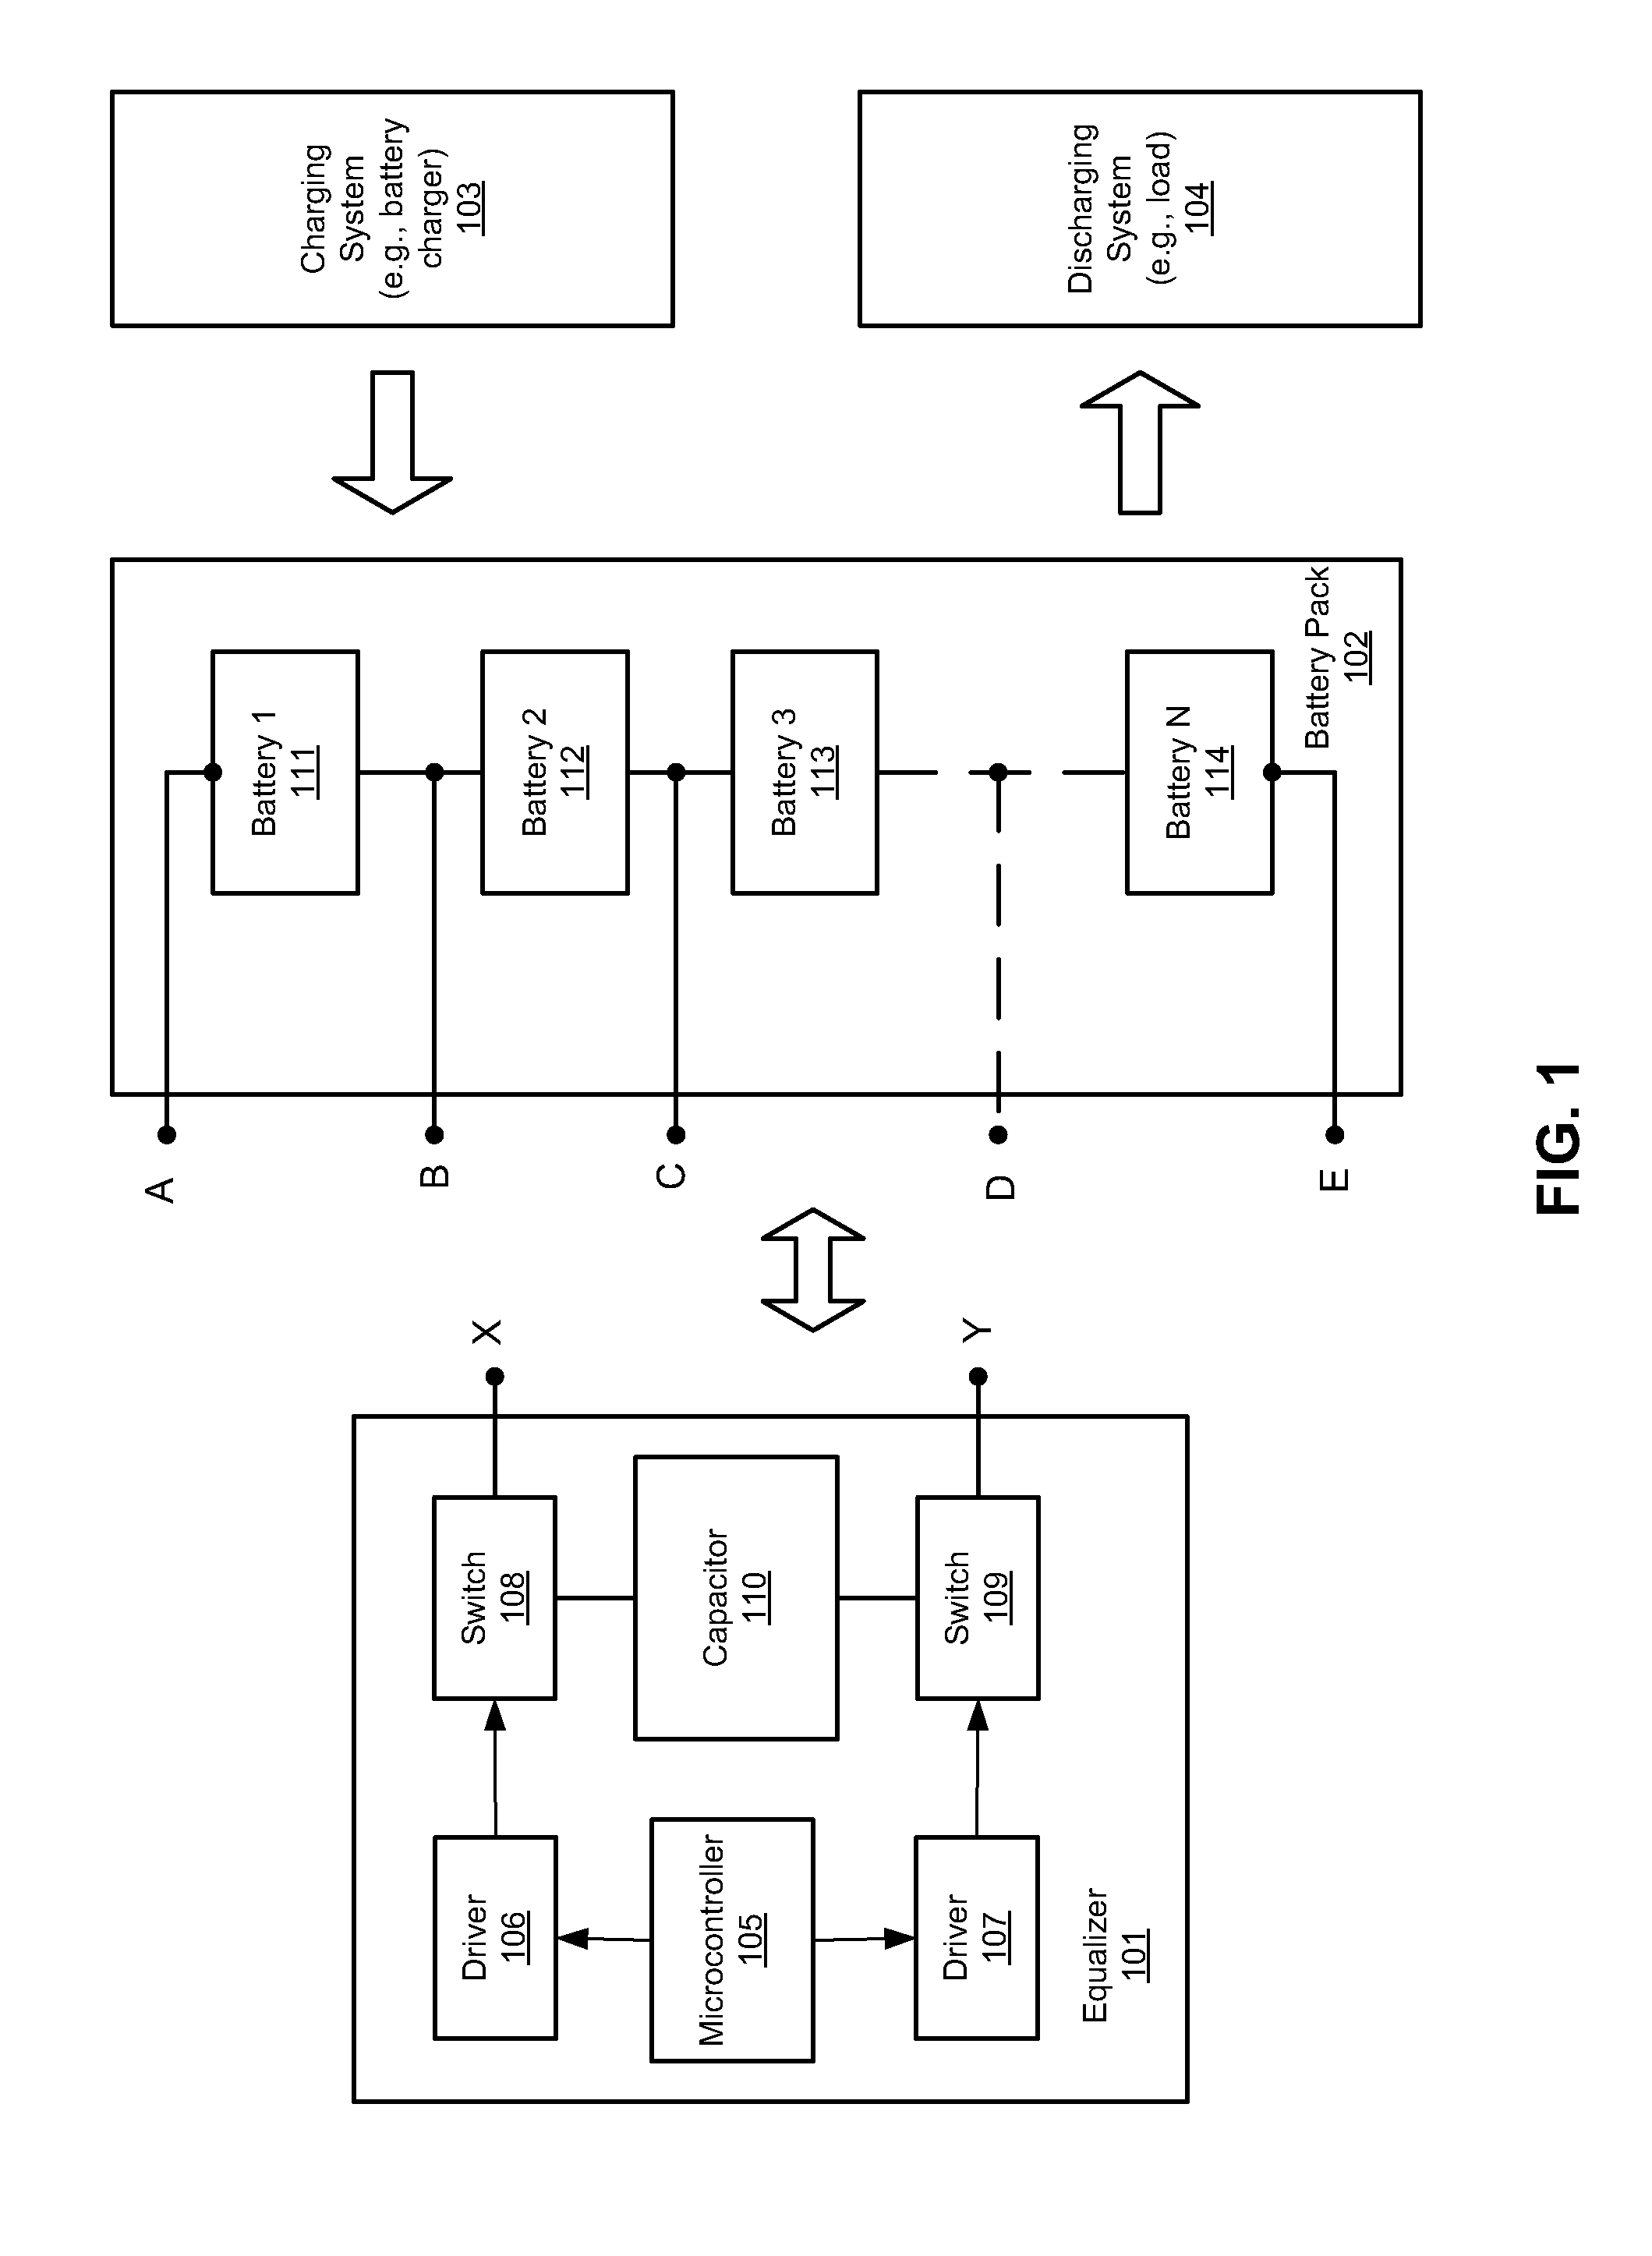 Sequencing switched single capacitor for automatic equalization of batteries connected in series